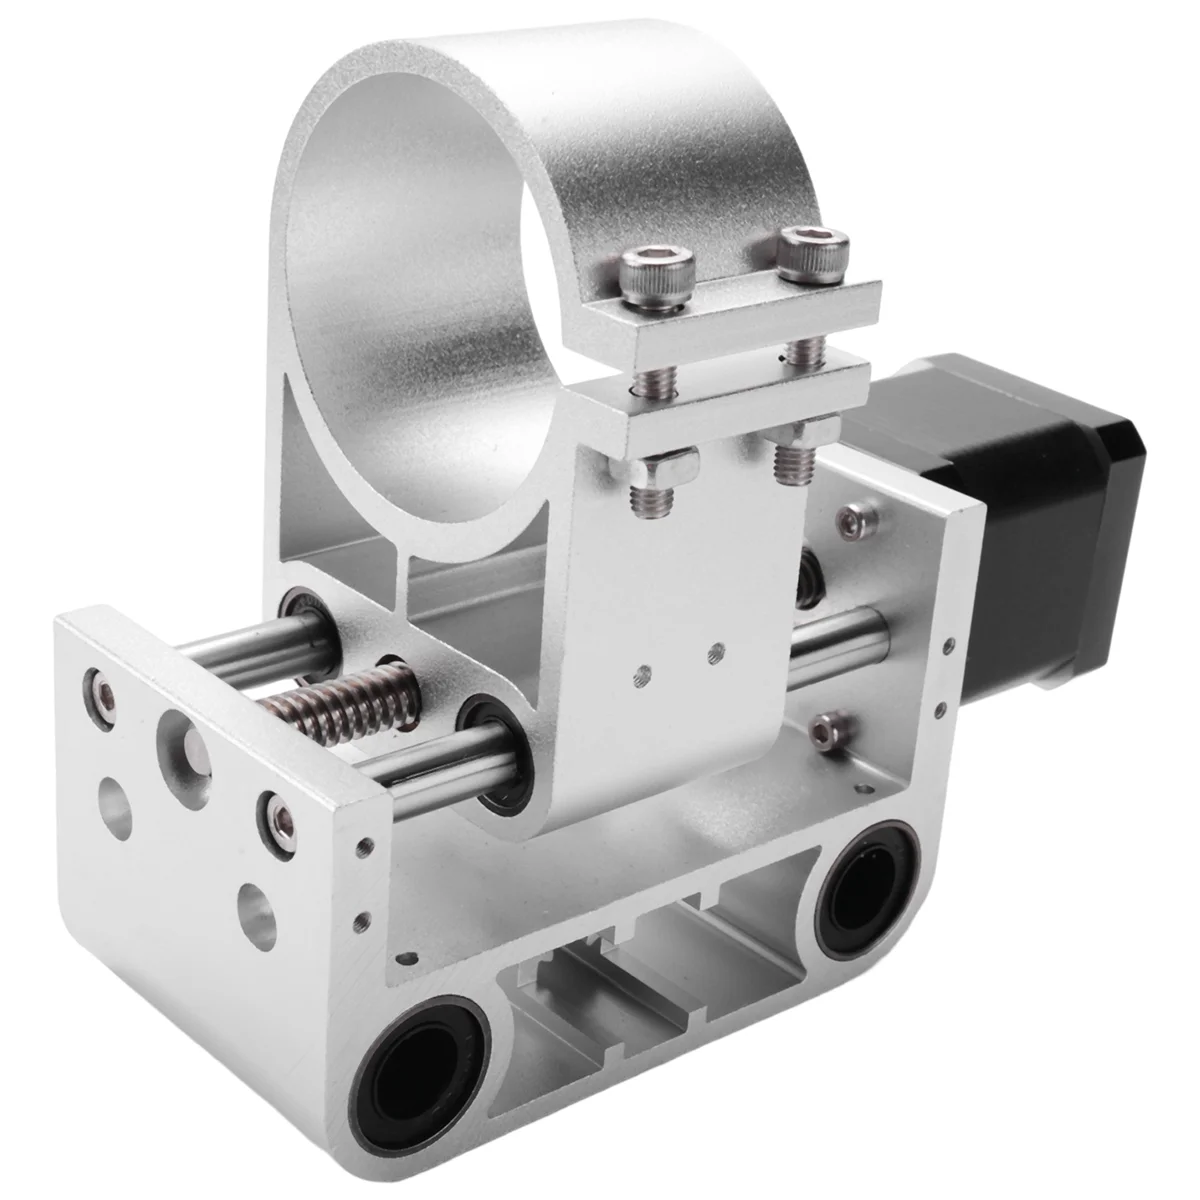 

CNC 3018 MAX Aluminum Z Axis Spindle Motor Mount 200W Spindle Holder 52mm Diameter for CNC 3018 MAX